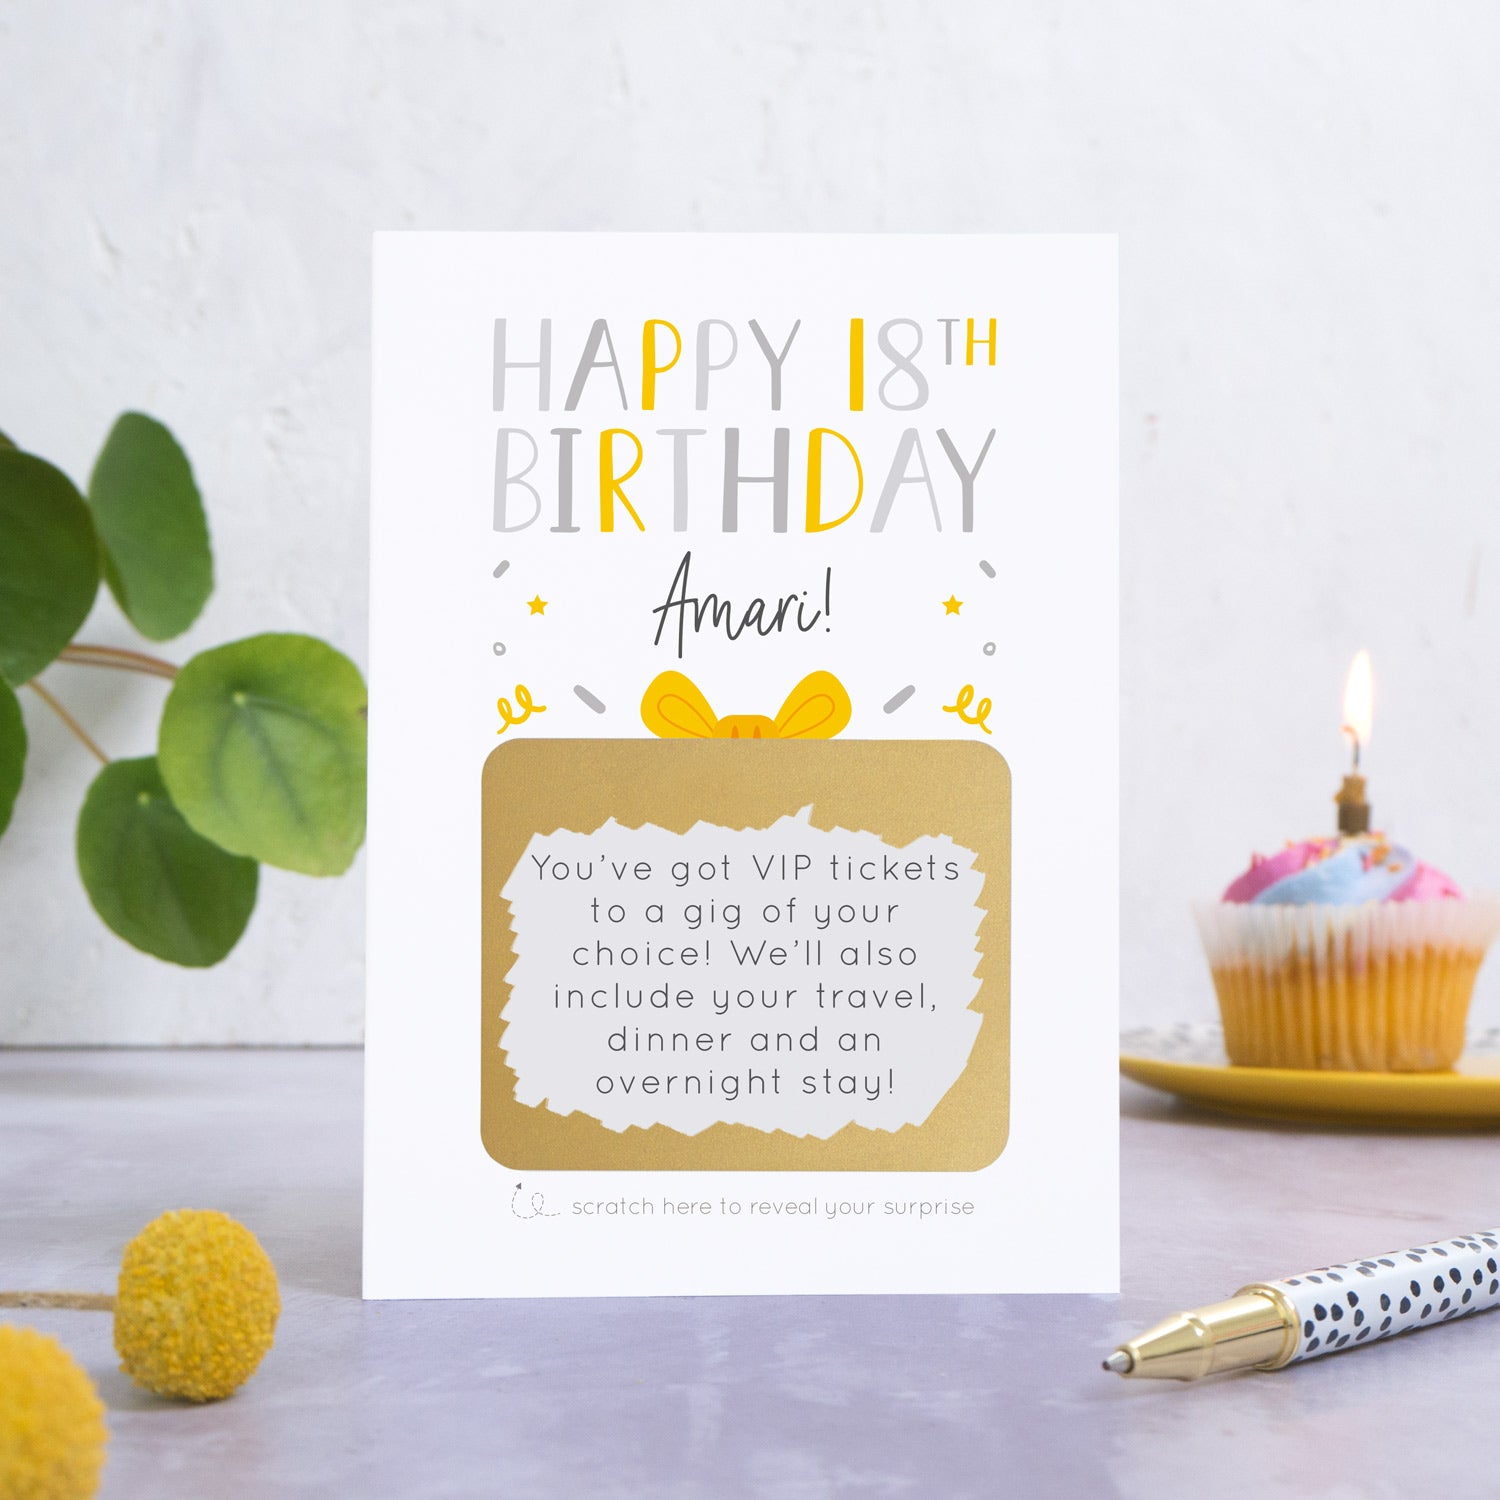 A personalised happy 18th birthday scratch card in grey that has been photographed on a white and grey background. There is foliage and yellow flowers on the left and a cupcake and a pen to the right. The card features the recipients name and a scratch panel that has been scratched off revealing a personalised message.